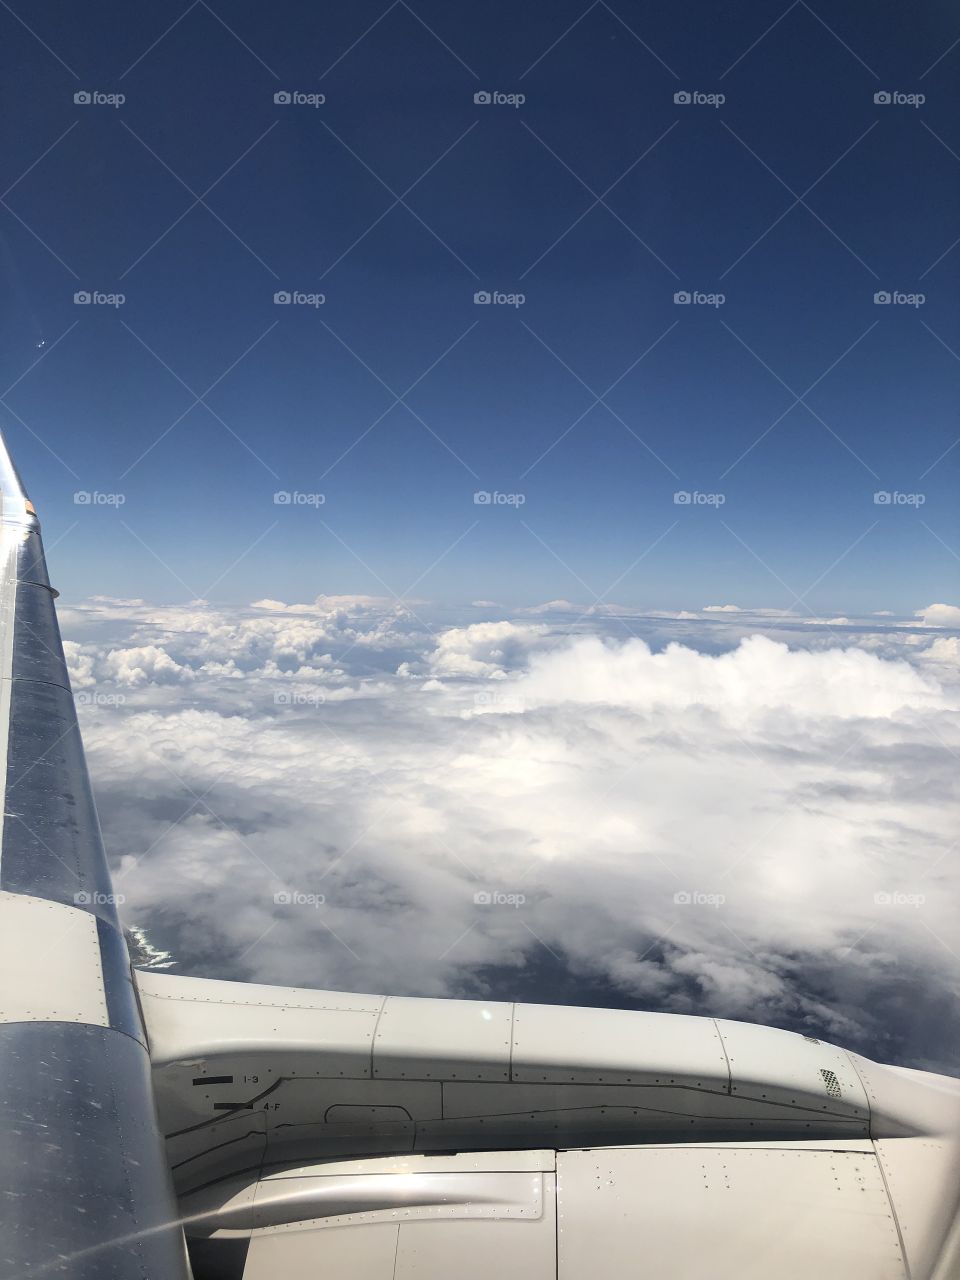 The gorgeous view of clouds, white and fluffy, framed by the wing of an airplane High in the sky. 